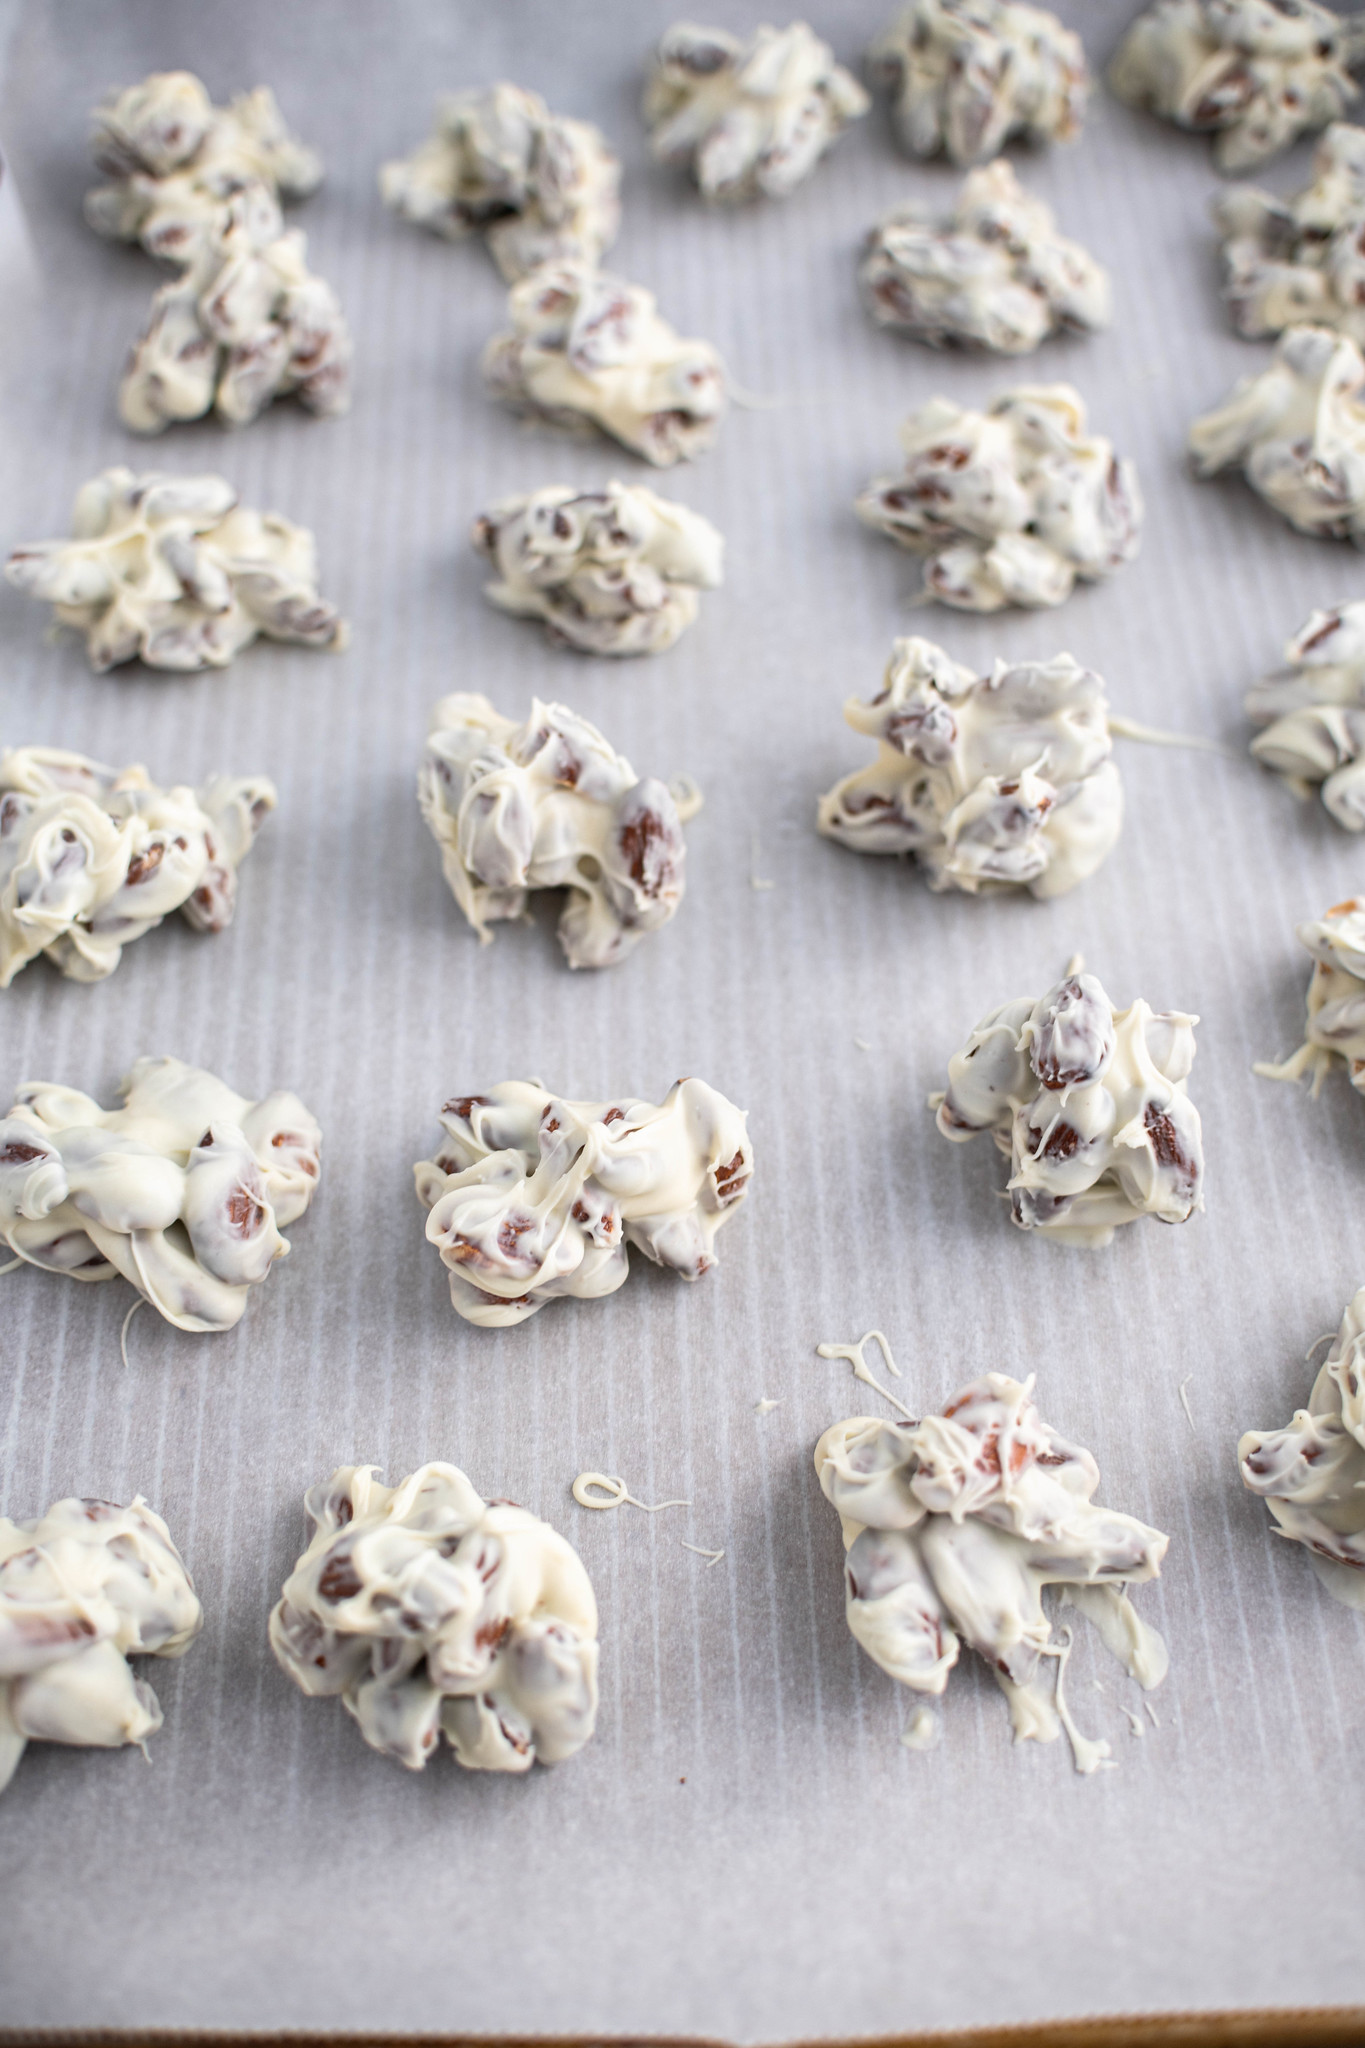 white chocolate almond clusters on parchment paper.